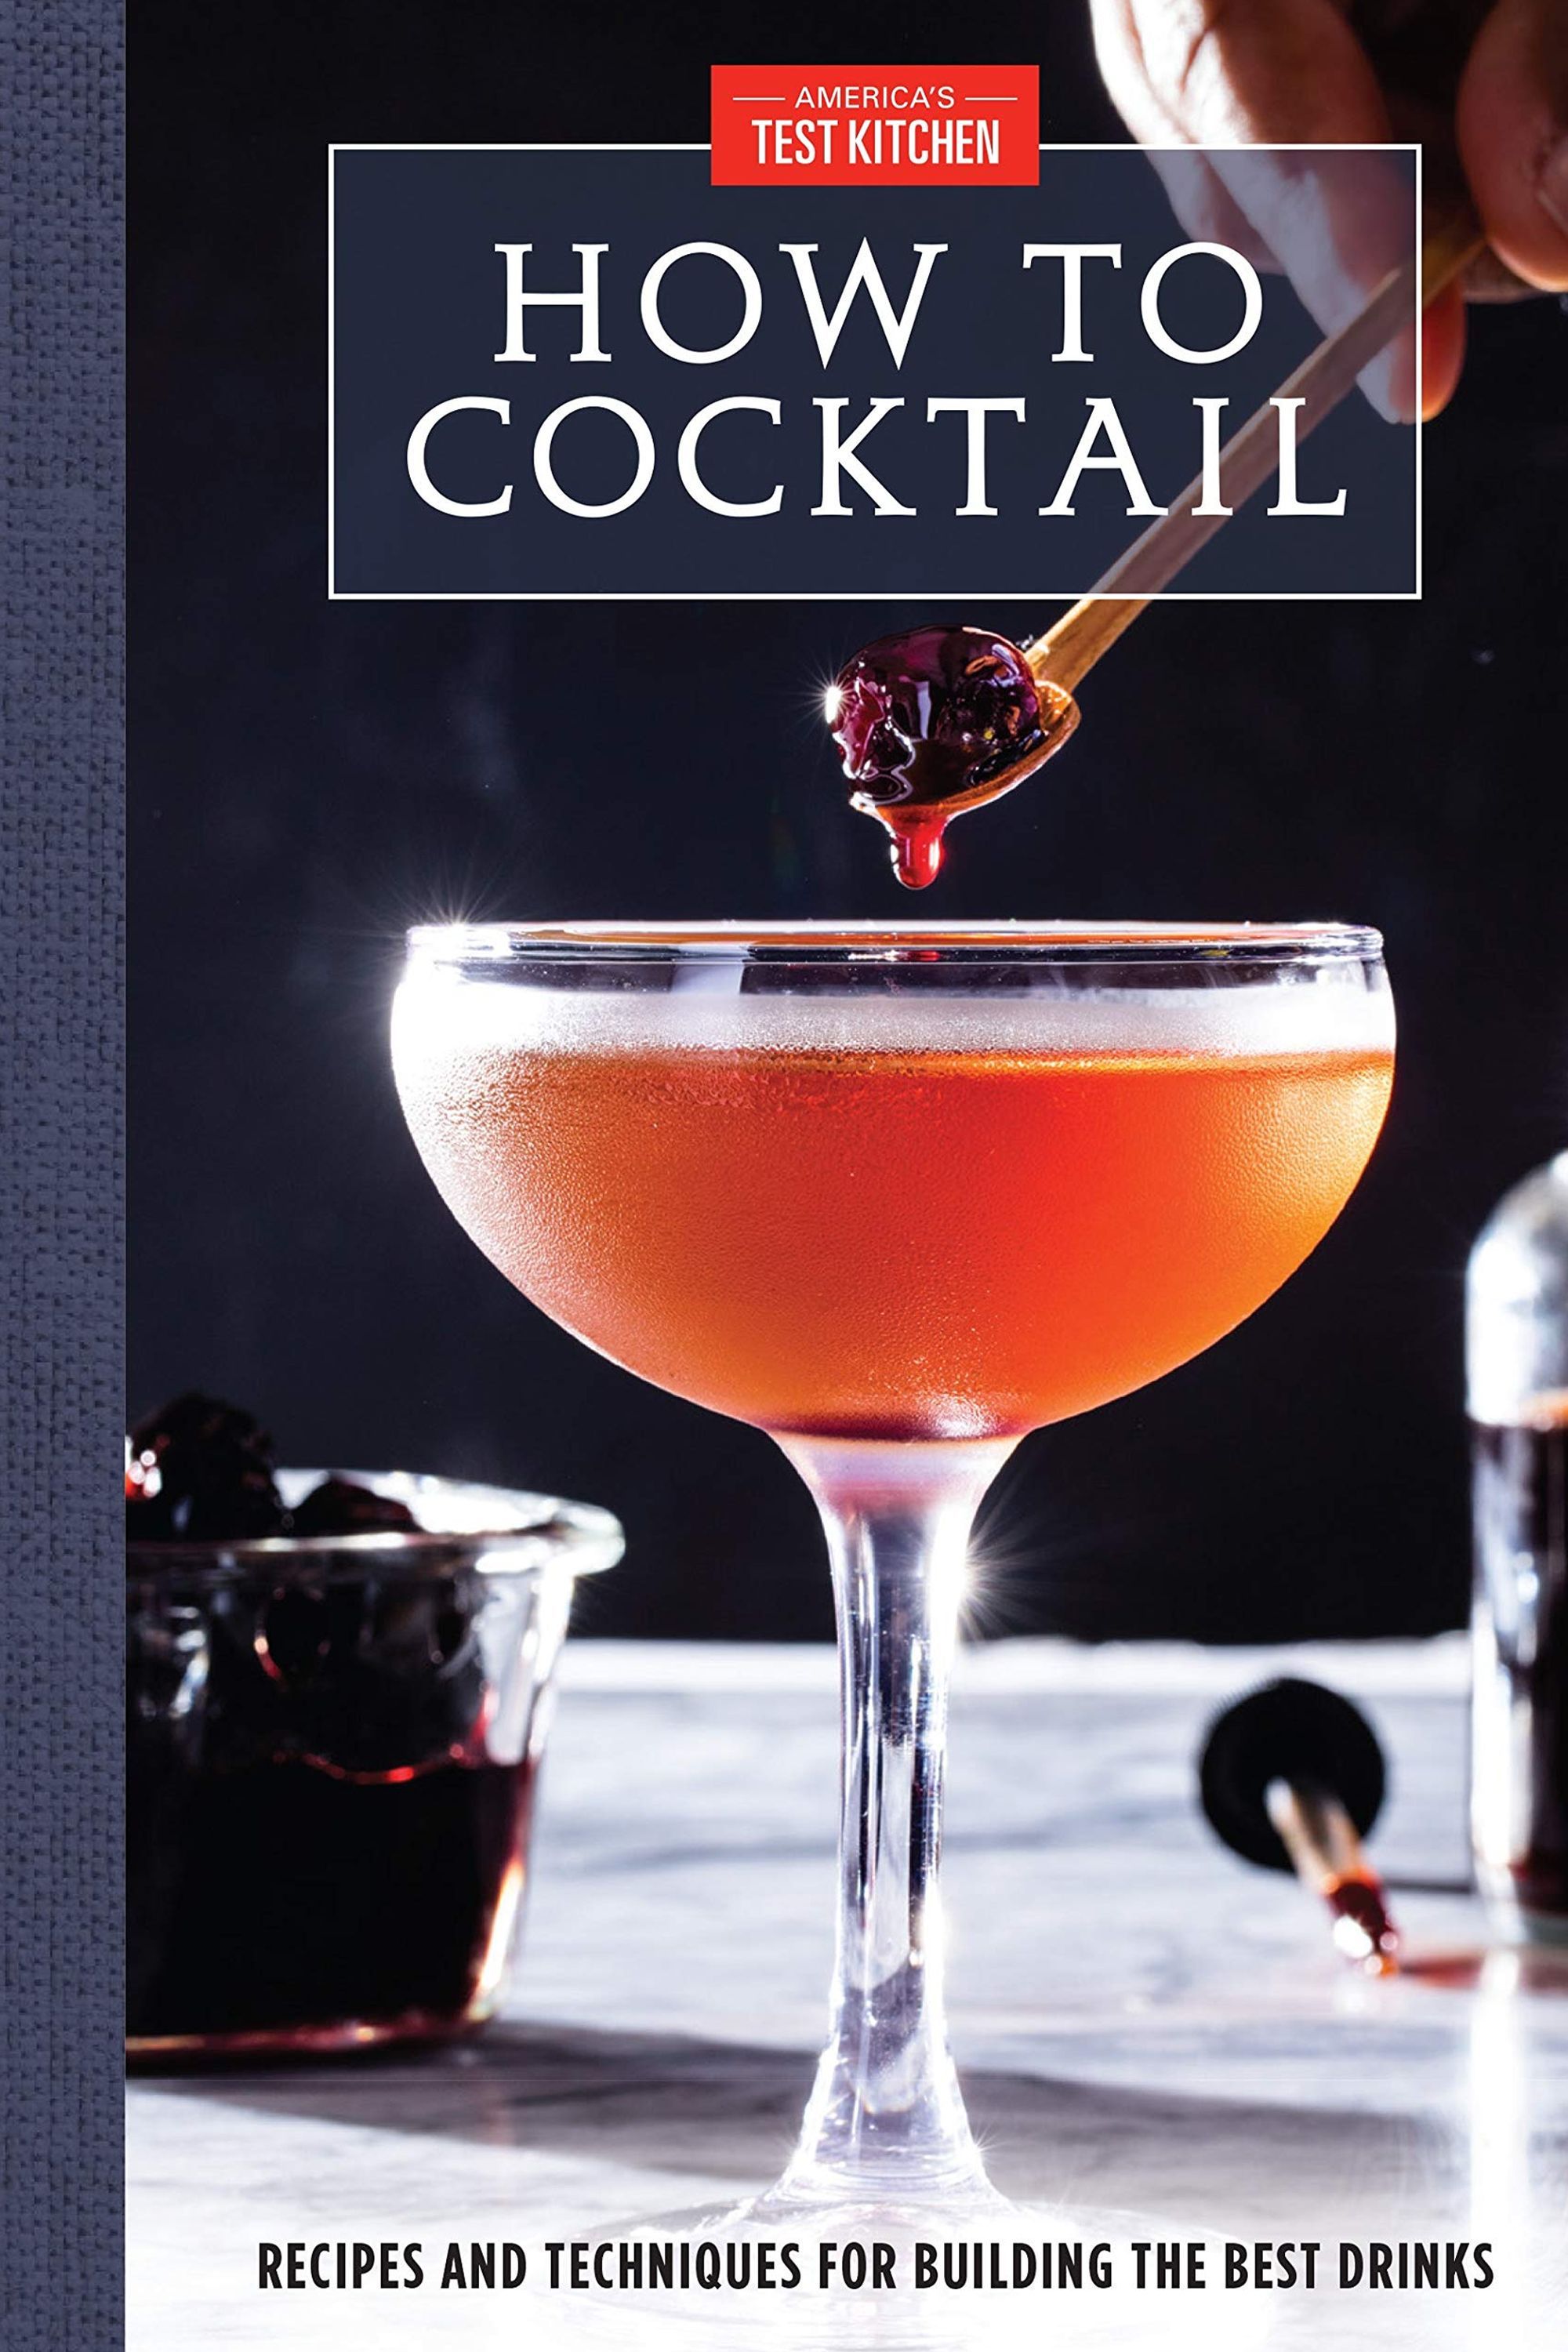 How to Cocktail by America's Test Kitchen